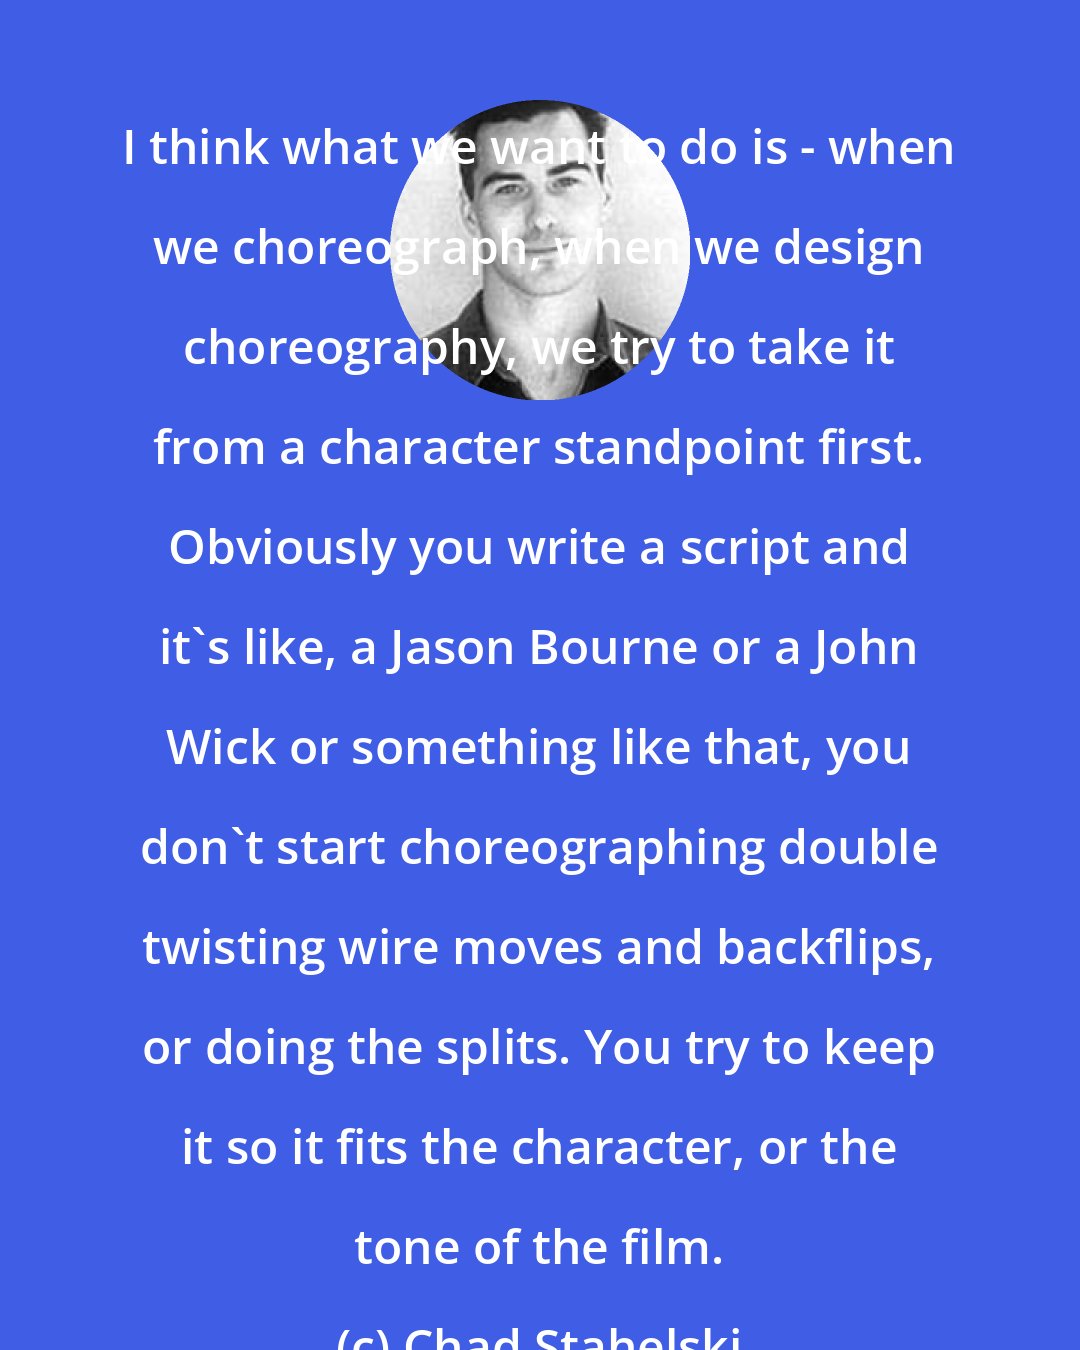 Chad Stahelski: I think what we want to do is - when we choreograph, when we design choreography, we try to take it from a character standpoint first. Obviously you write a script and it's like, a Jason Bourne or a John Wick or something like that, you don't start choreographing double twisting wire moves and backflips, or doing the splits. You try to keep it so it fits the character, or the tone of the film.